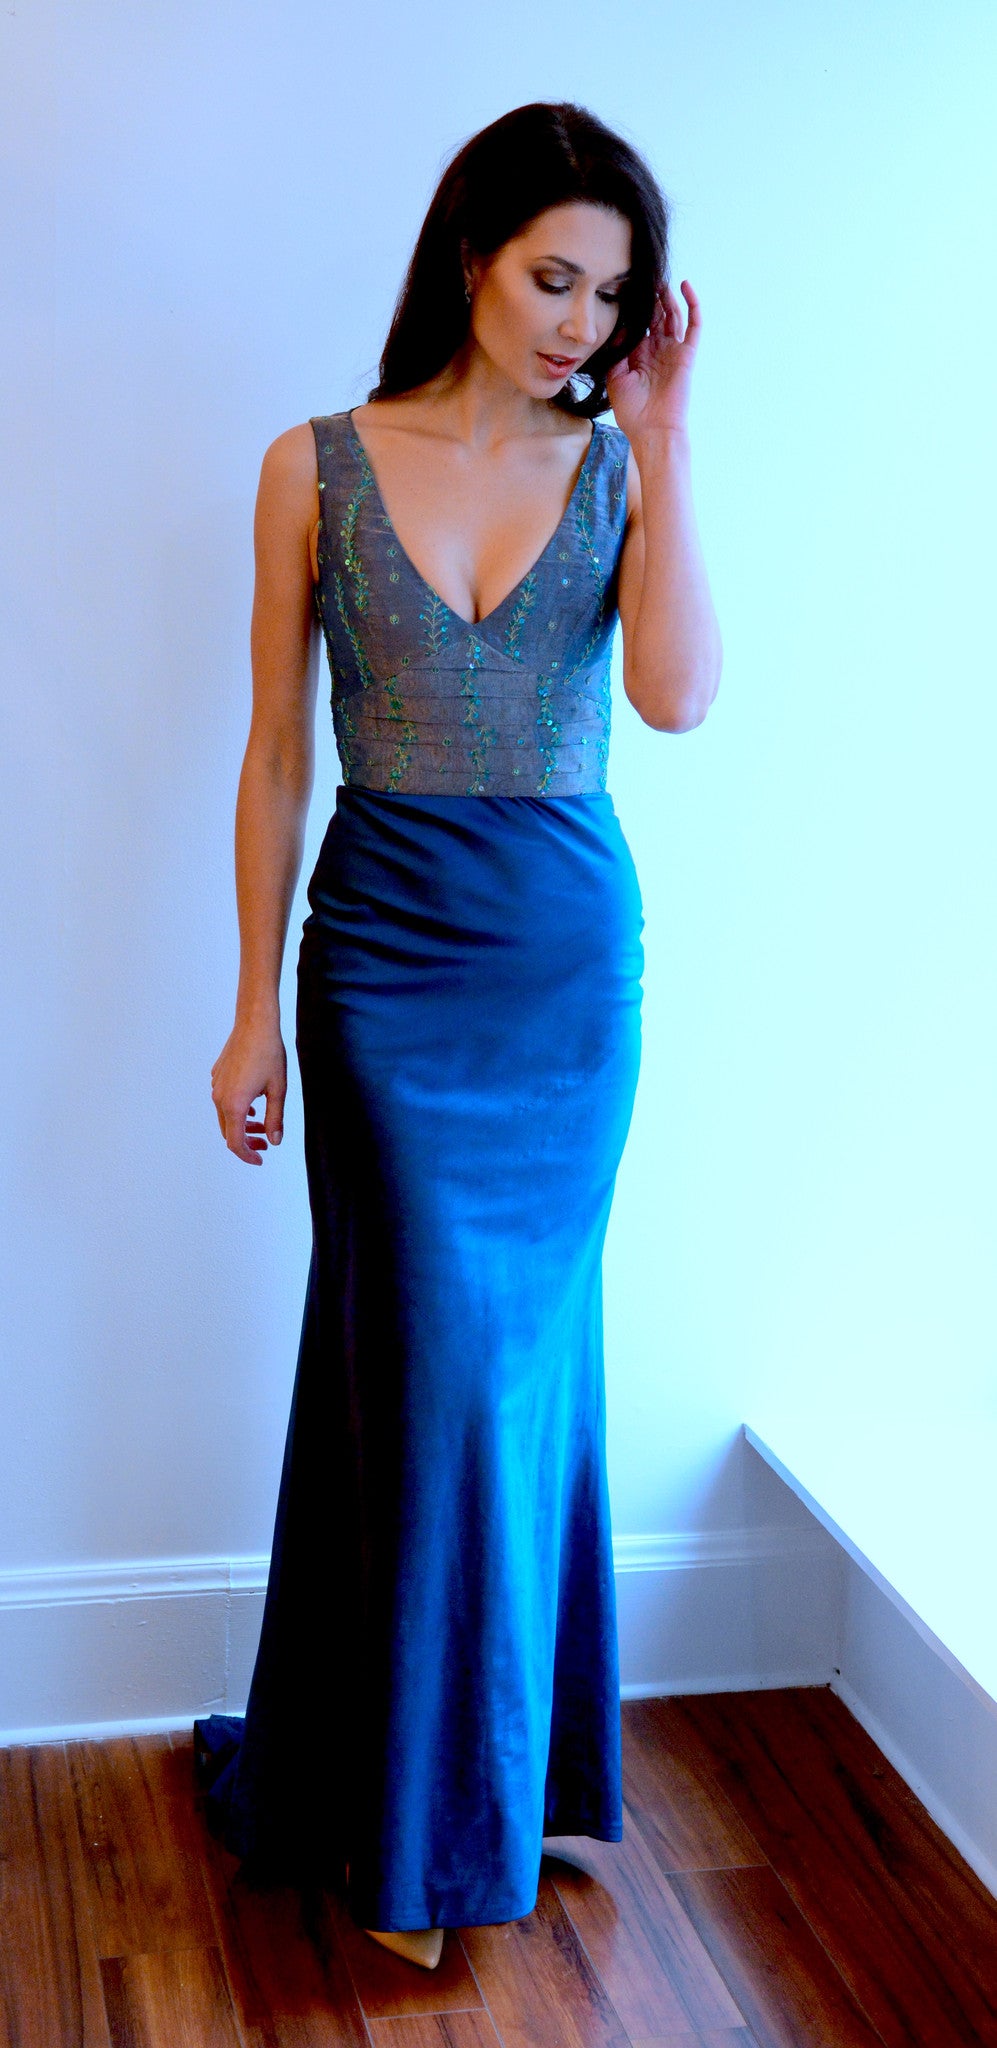 Classic Emerald Evening Gown